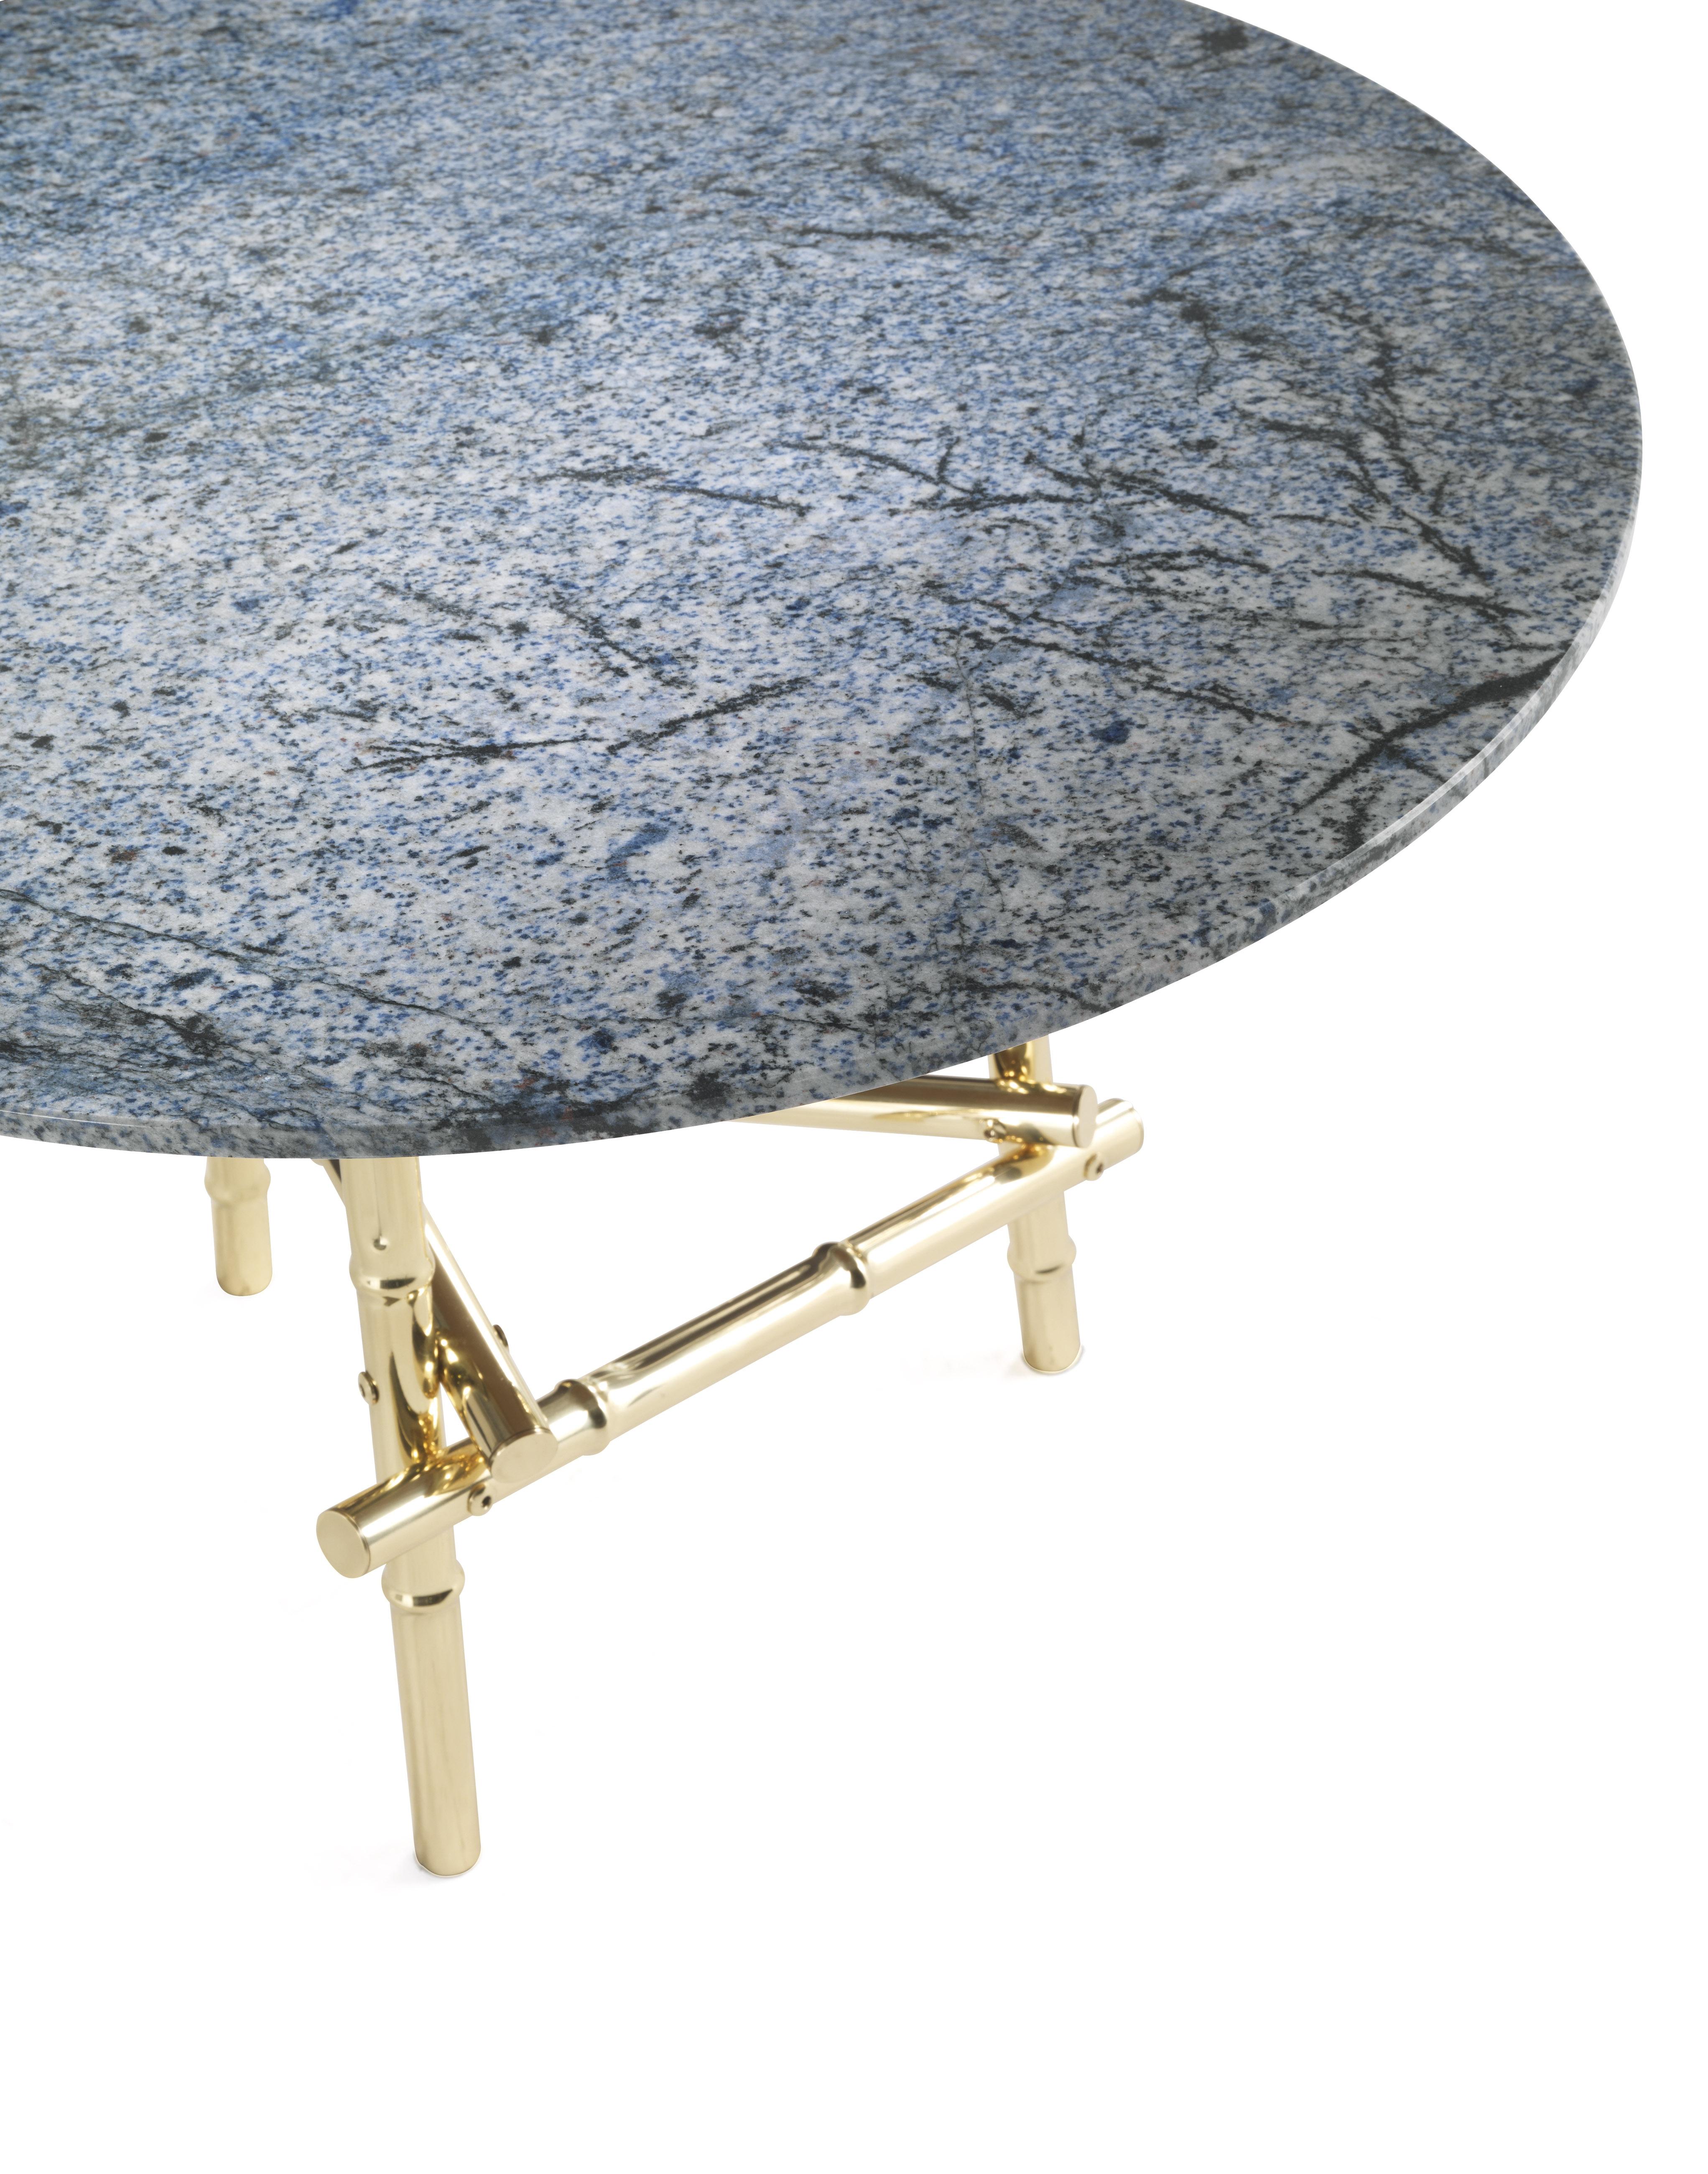 An elegant and evocative piece of furniture, the Samarcanda side tables features marble tops whose warm tones and spotted motifs recall the charm of arid deserts and distant lands. A pleasant dynamic effect that contrasts with the base made up of a